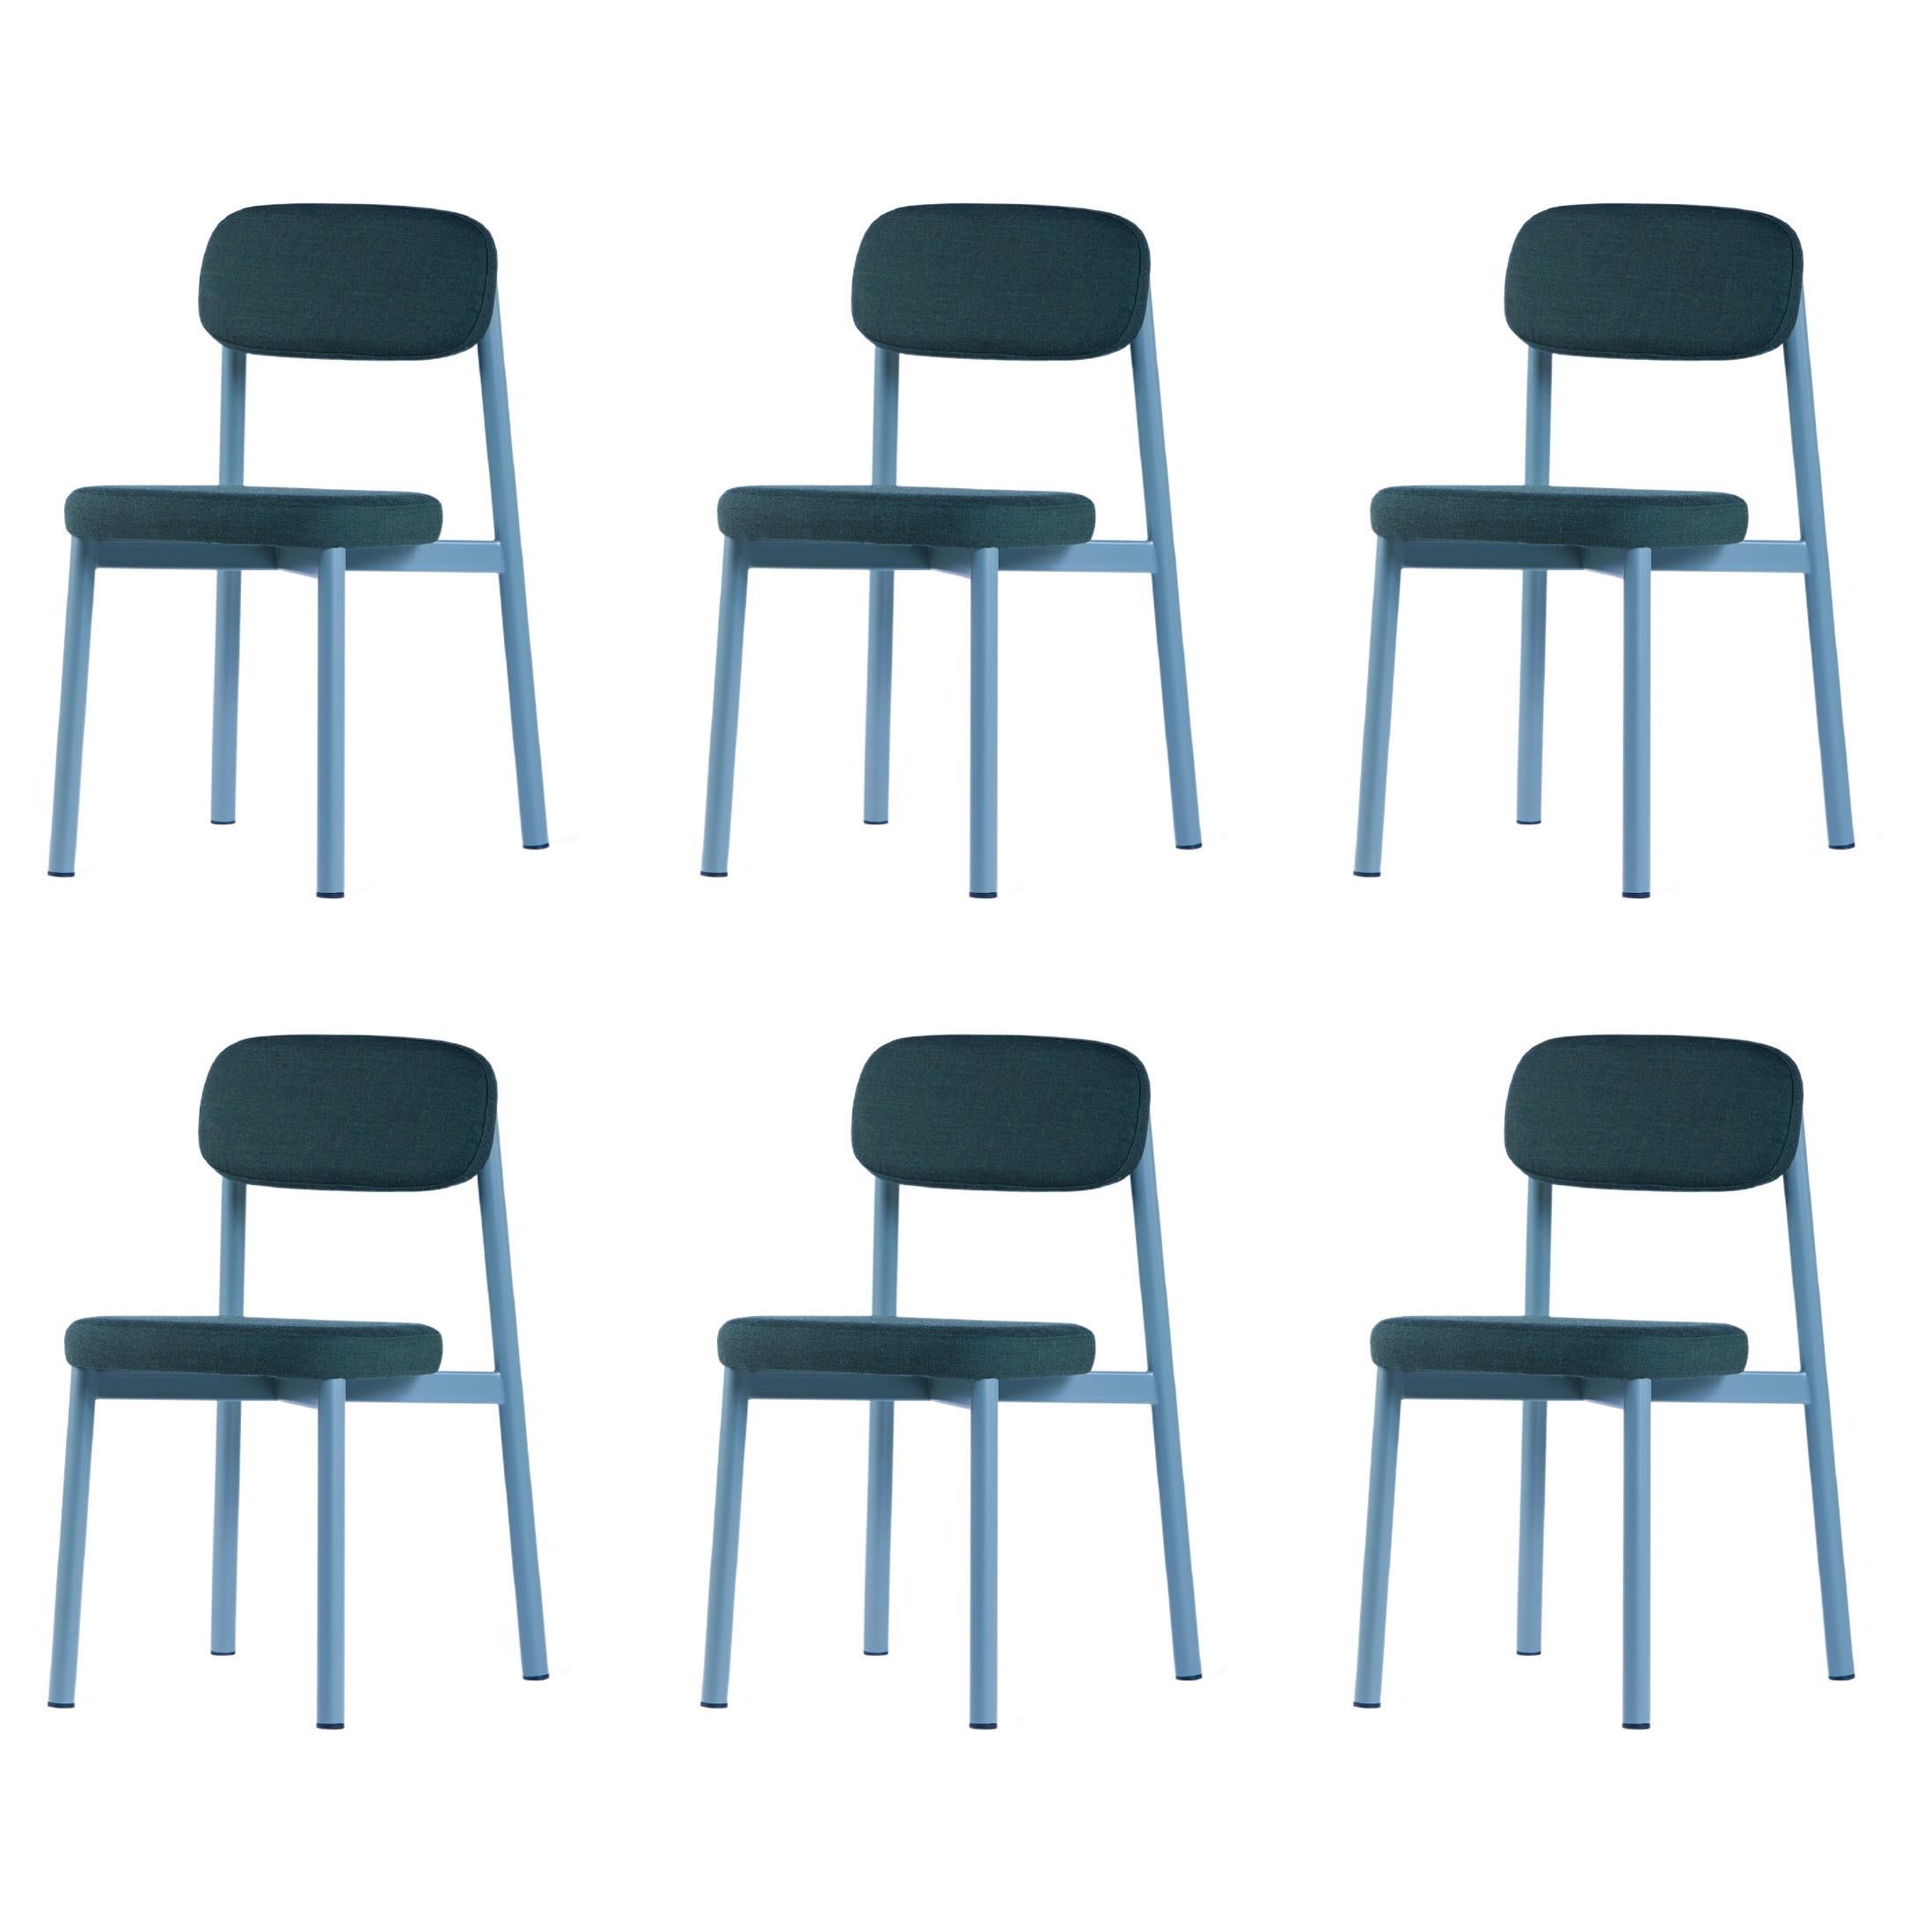 Set of 6 Green Residence Chairs by Kann Design